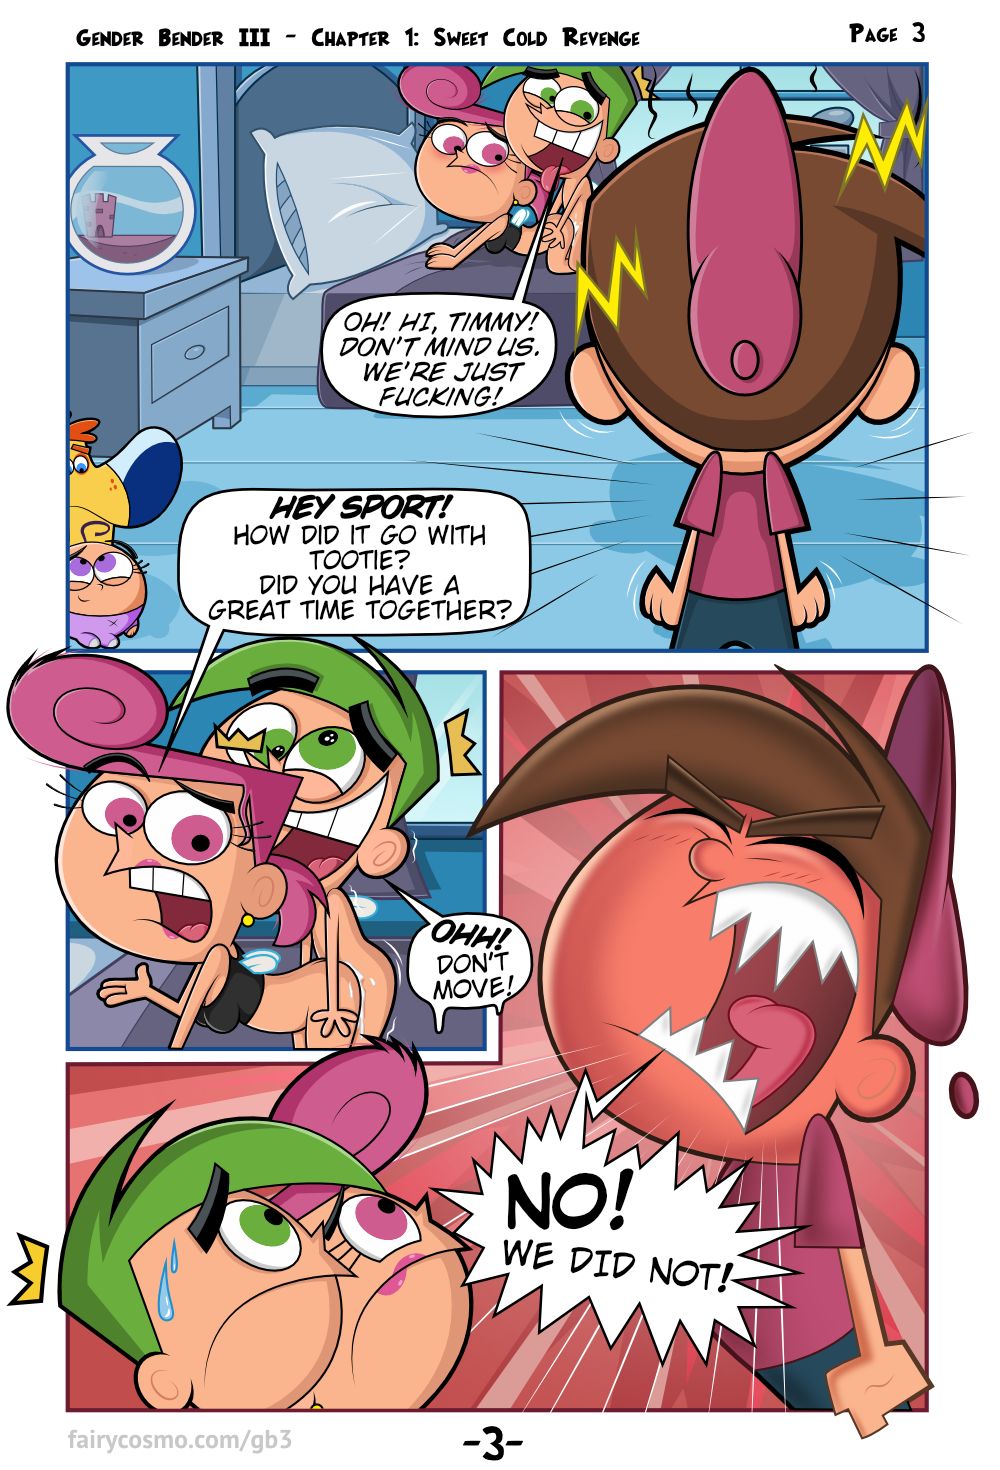 The Fairly Oddparents Porn - Gender Bender III - Fairly OddParents - KingComiX.com